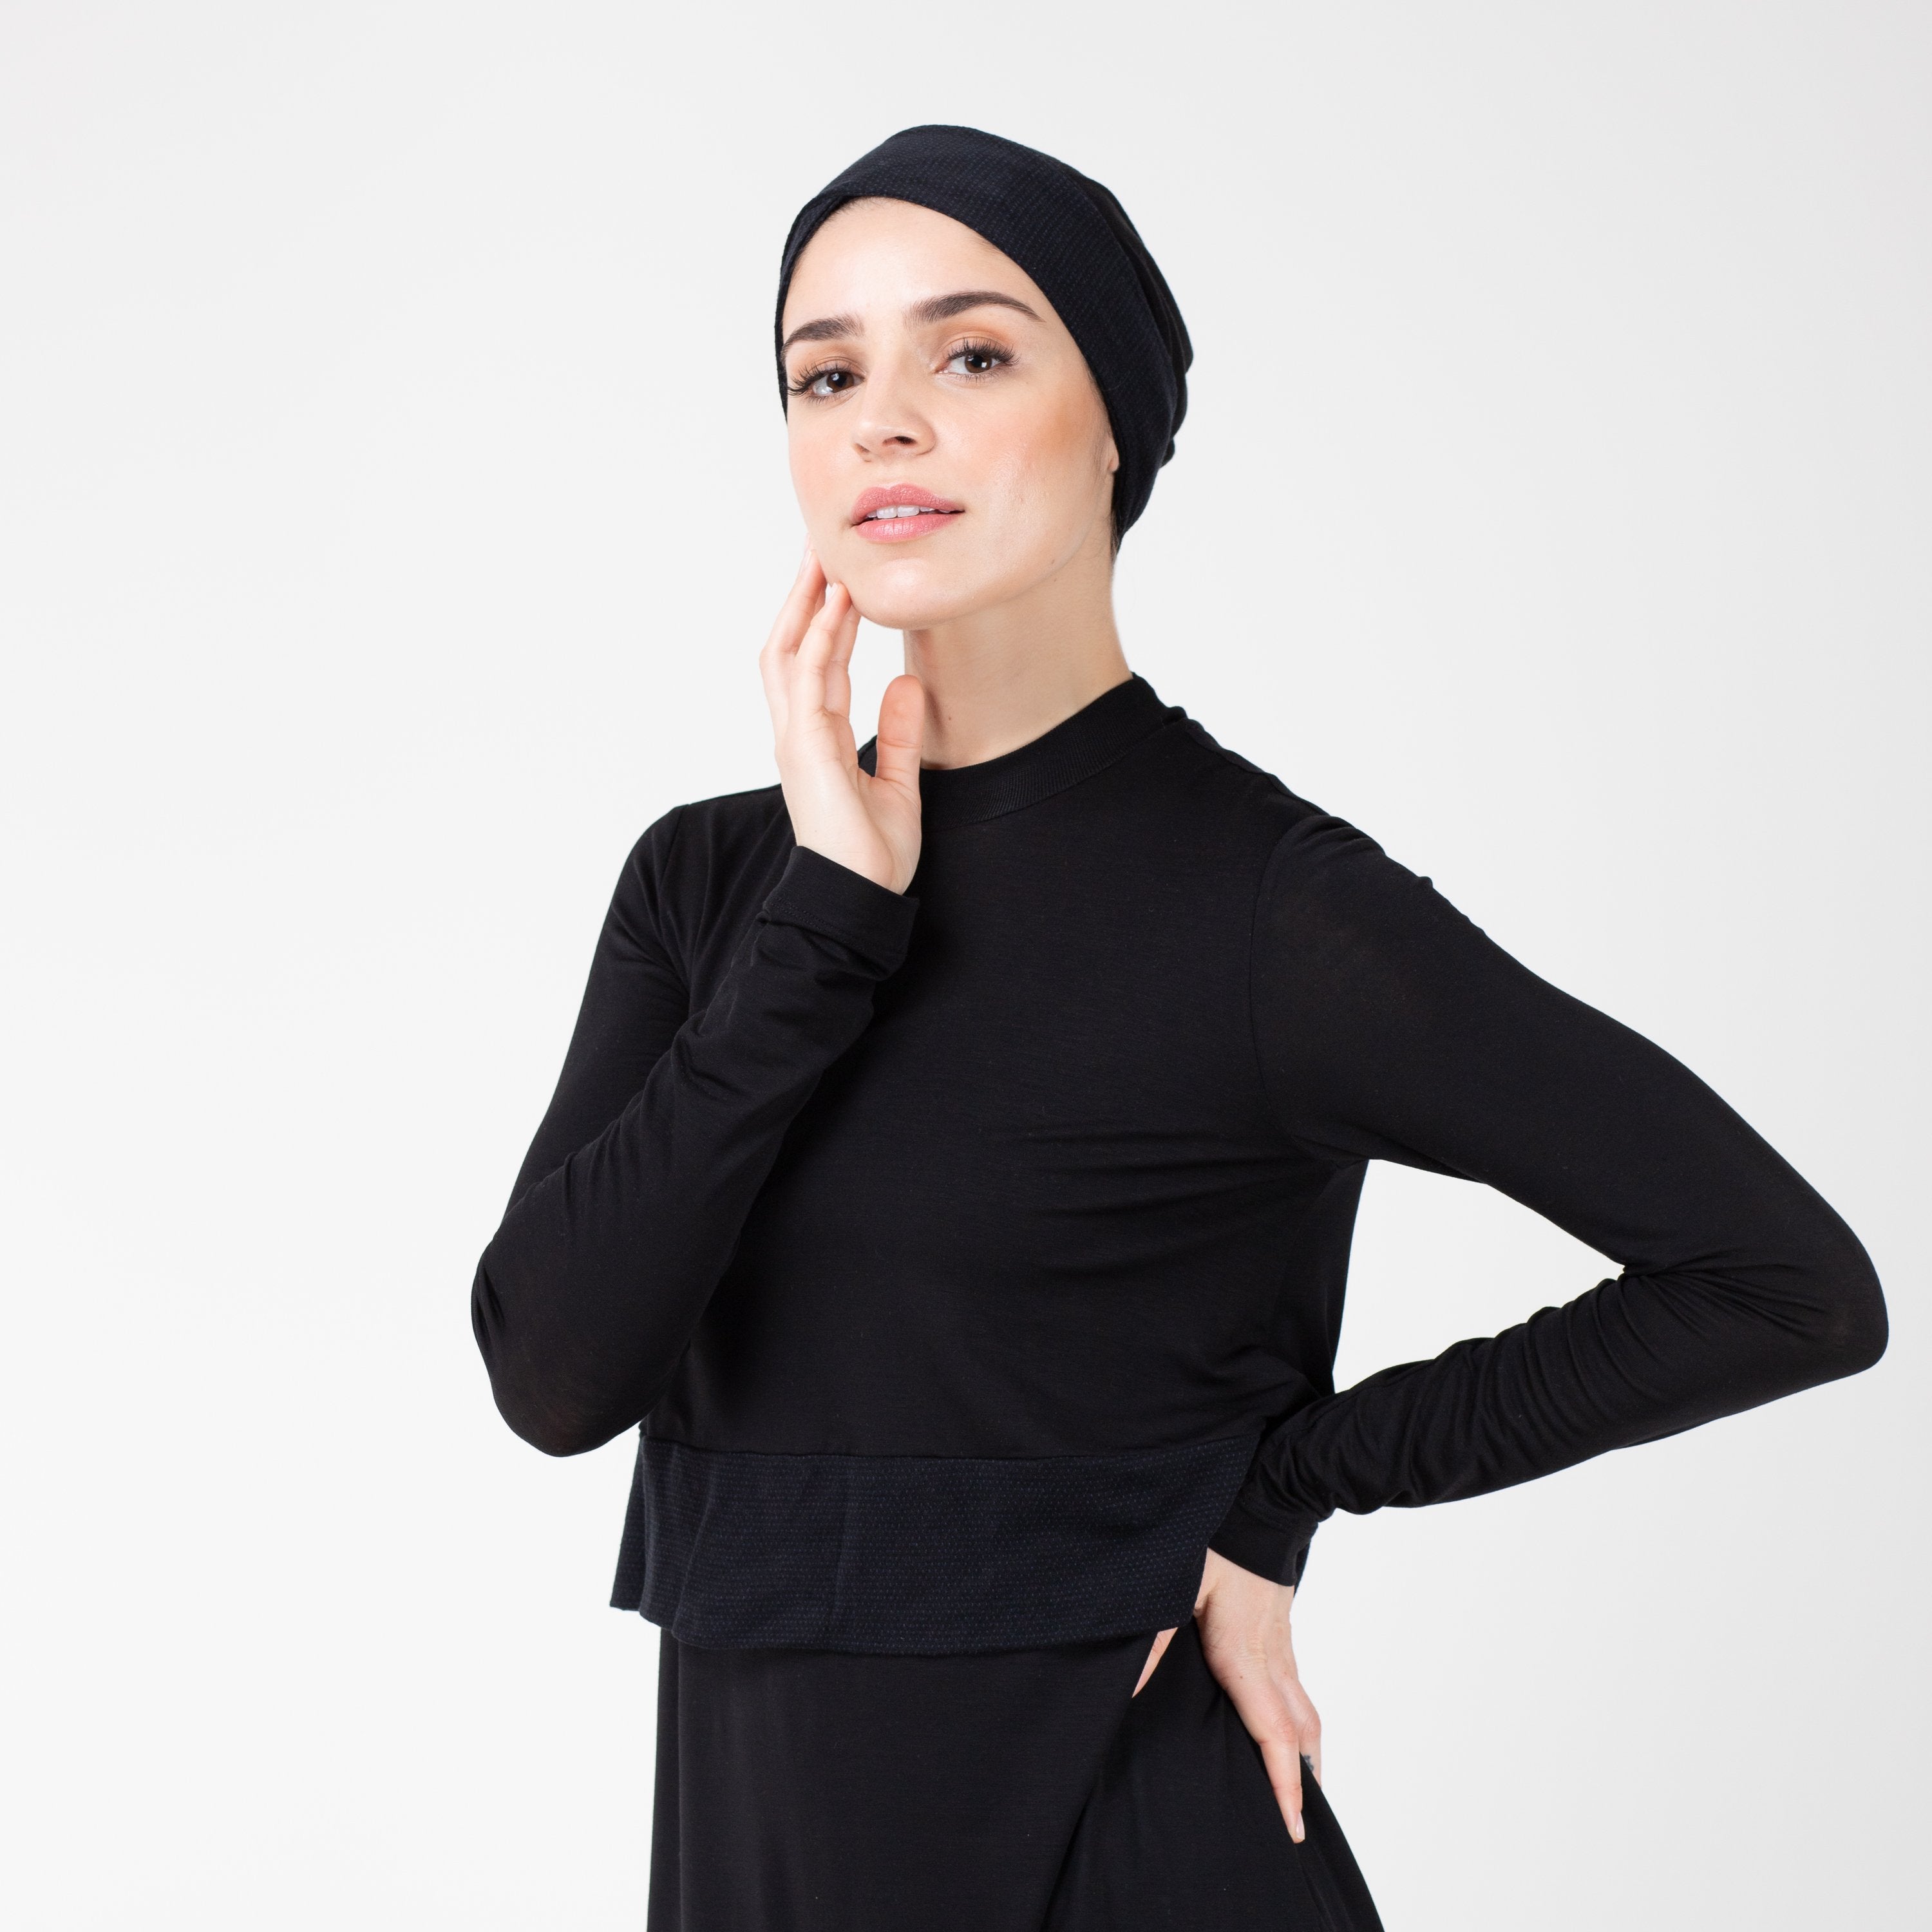 Woman facing left in black shirt with matching black HAWA headwrap, with her right hand touching her face and her left hand on her hip.